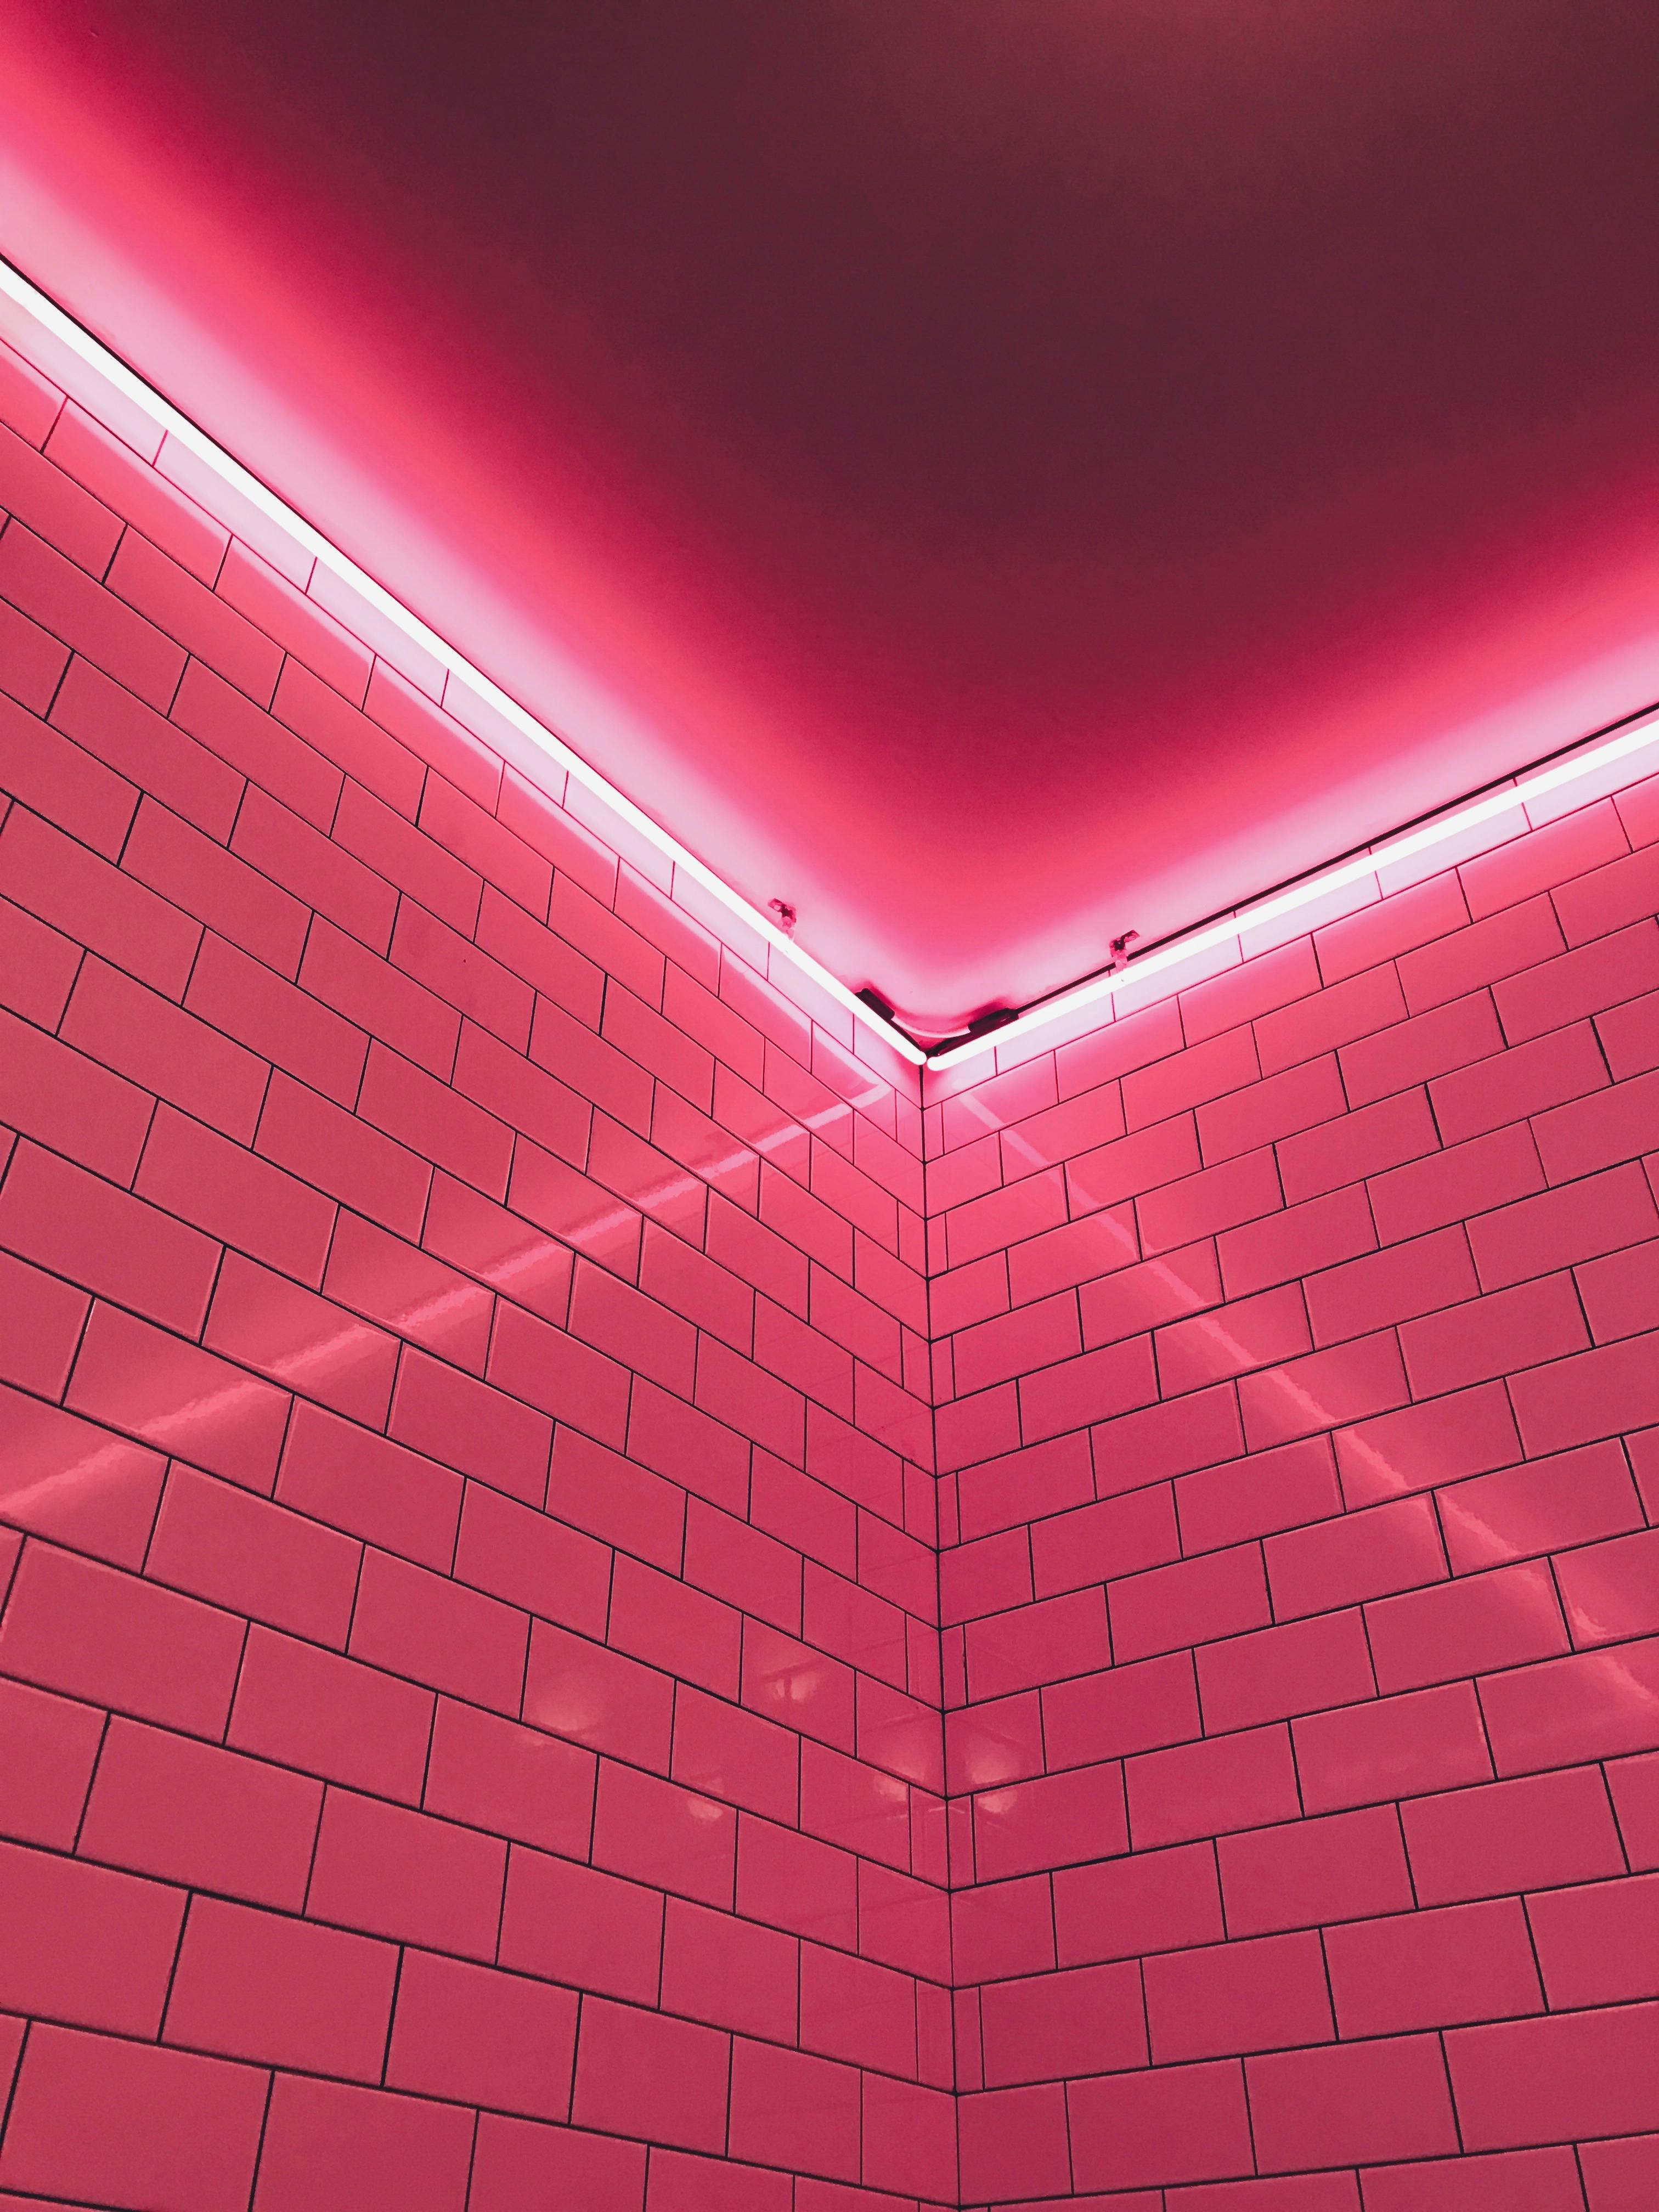 cool pink background designs